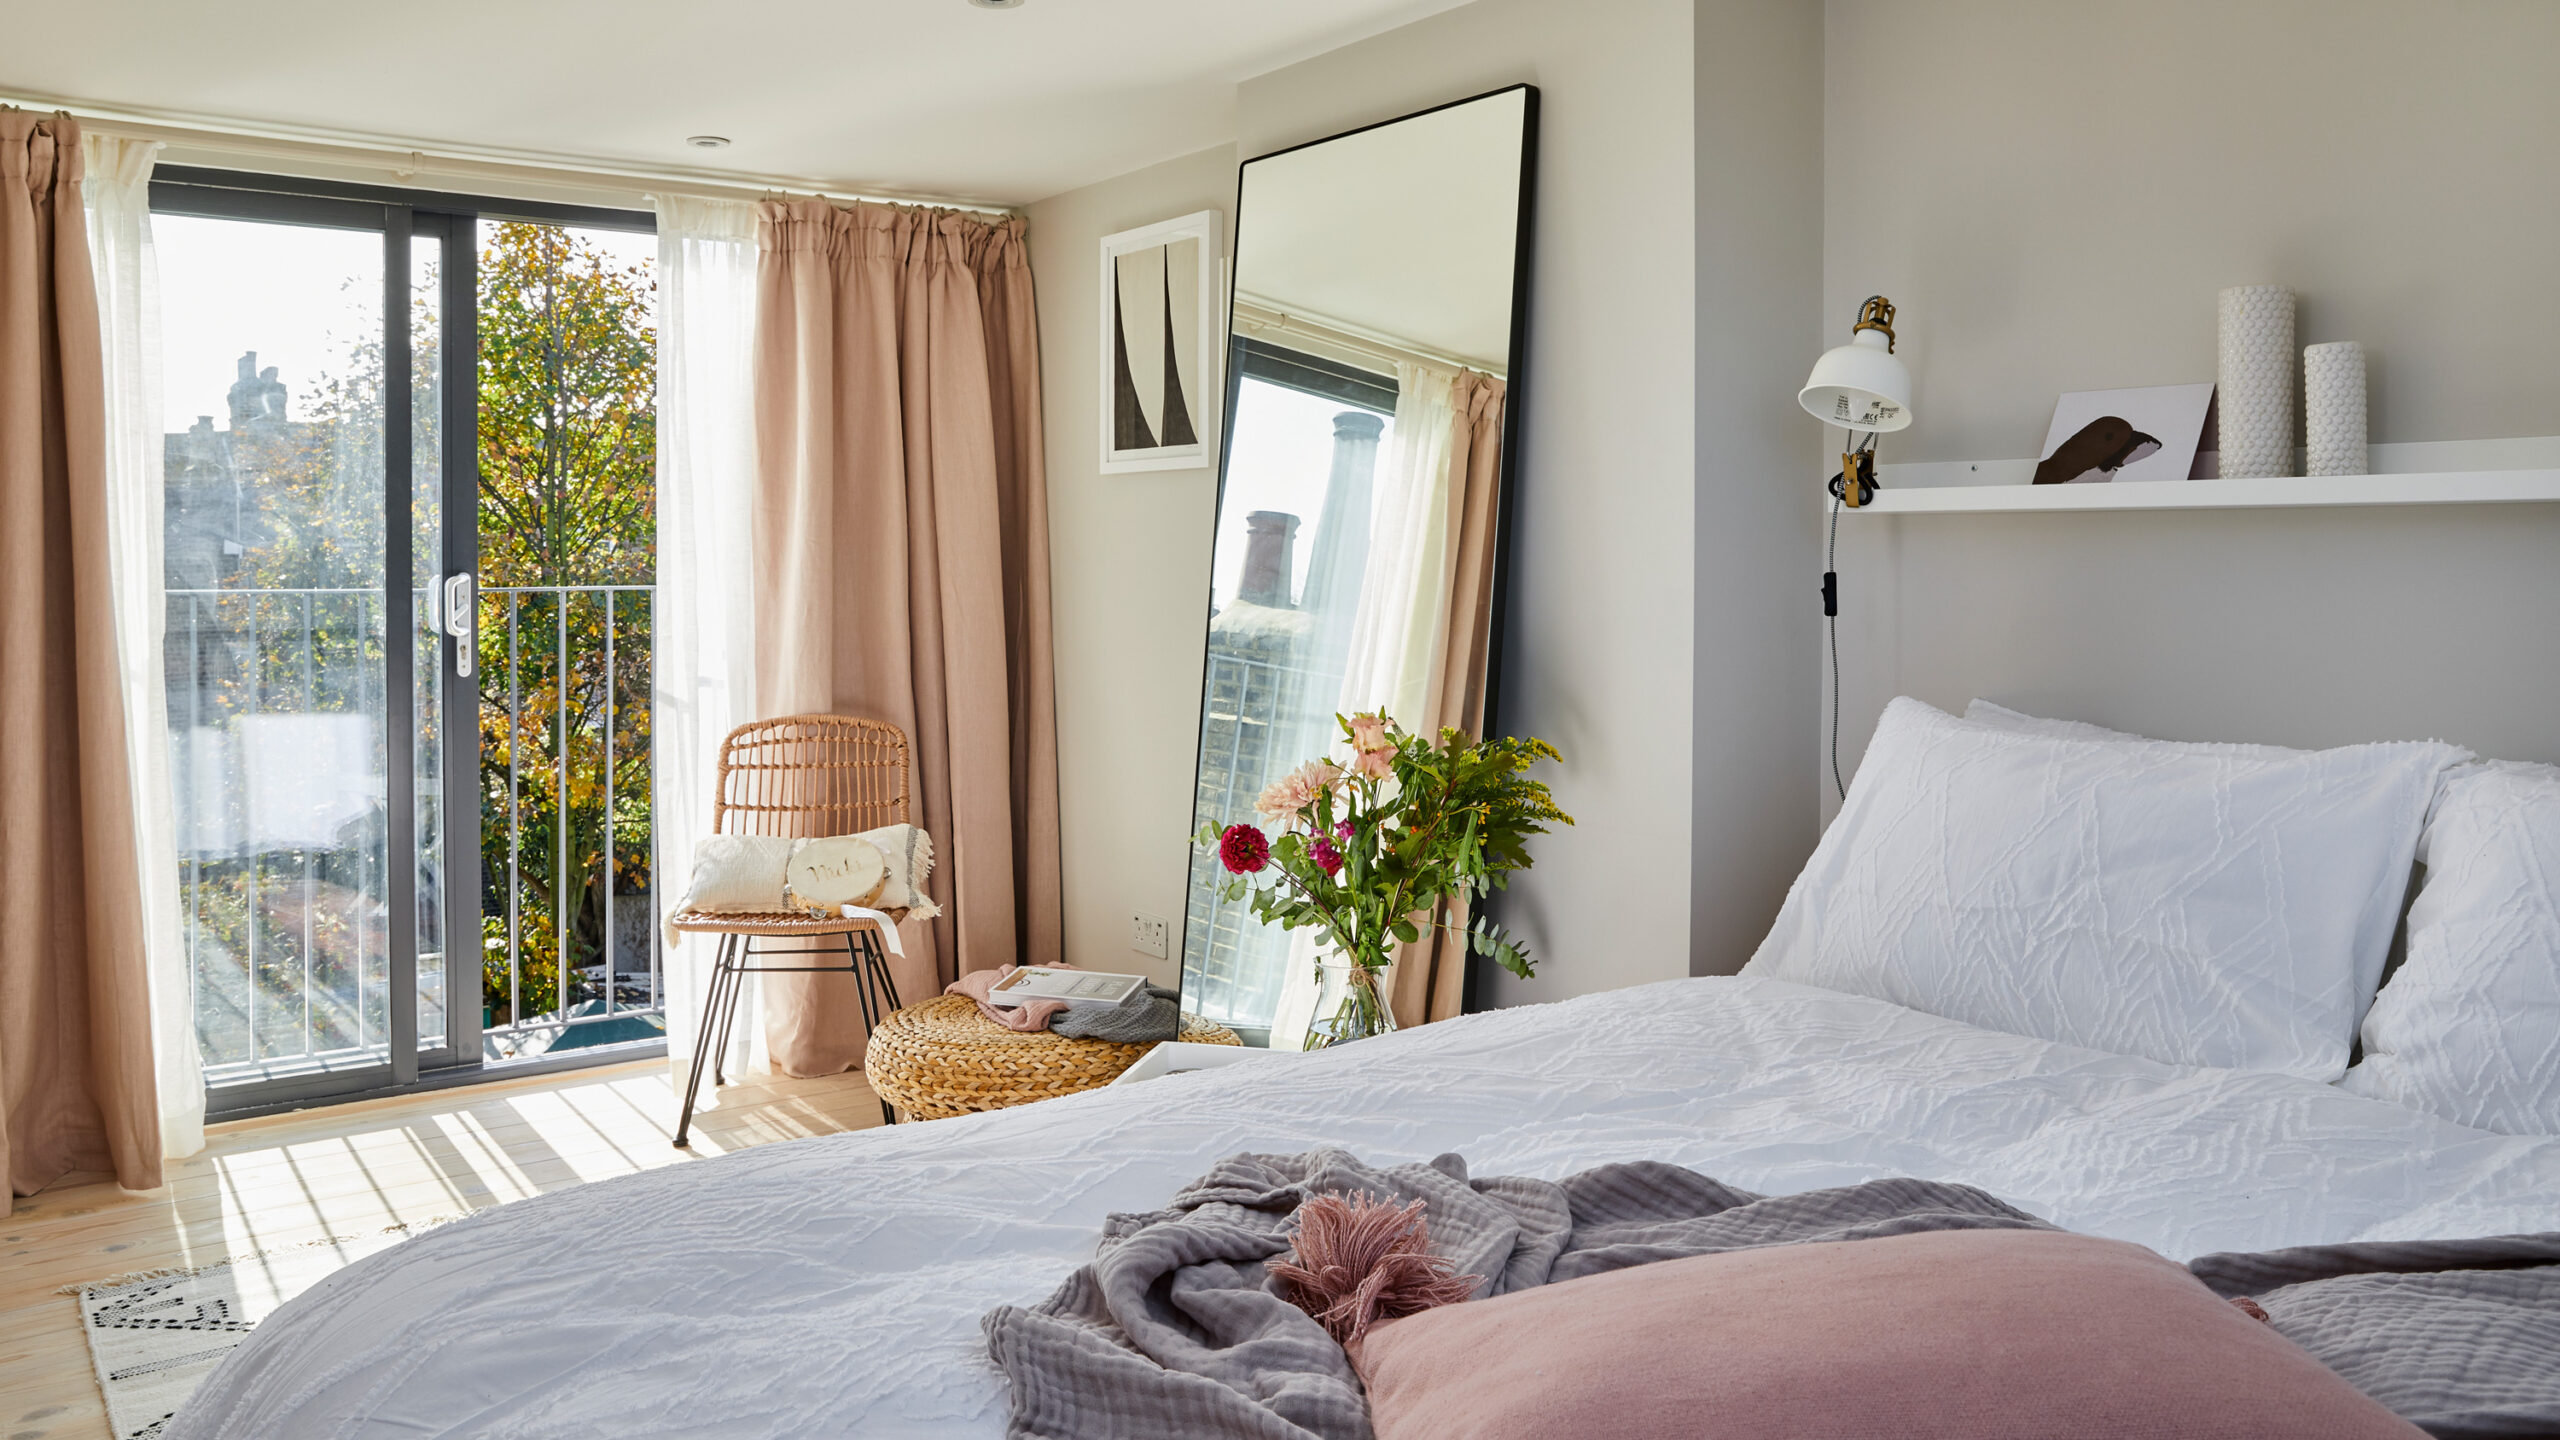 The best type of curtains for bedrooms